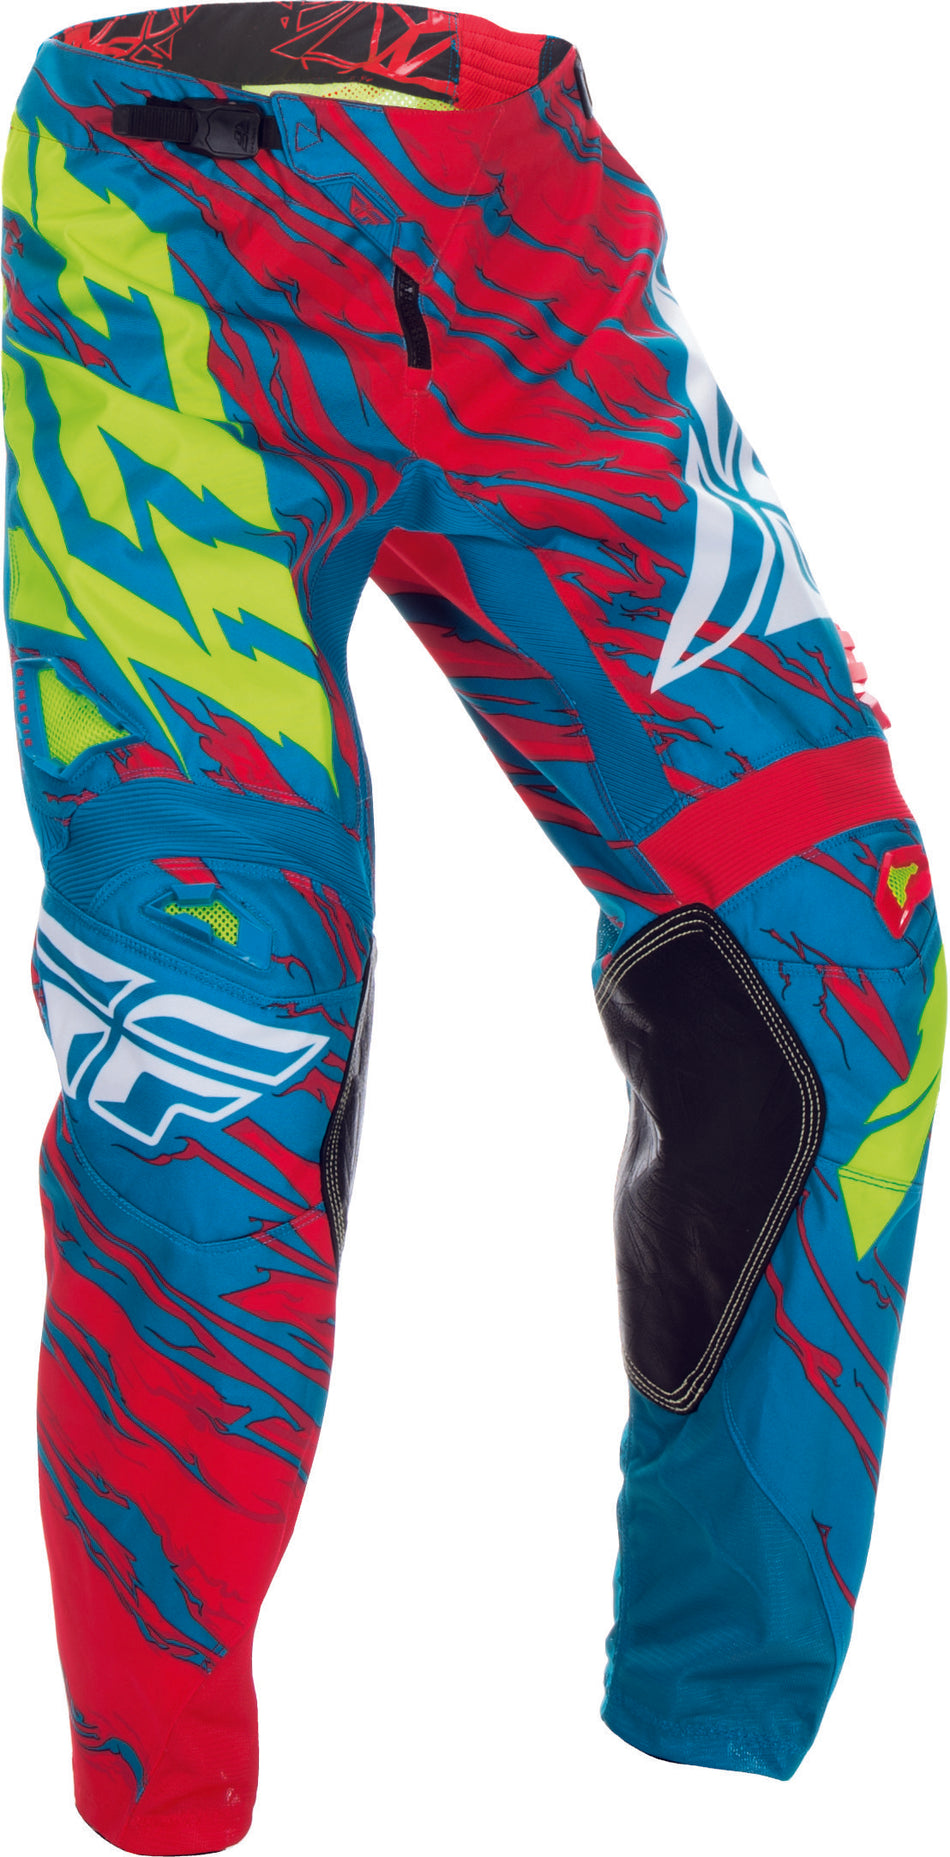 FLY RACING Kinetic Relapse Pant Teal/Red Sz 28 370-43928